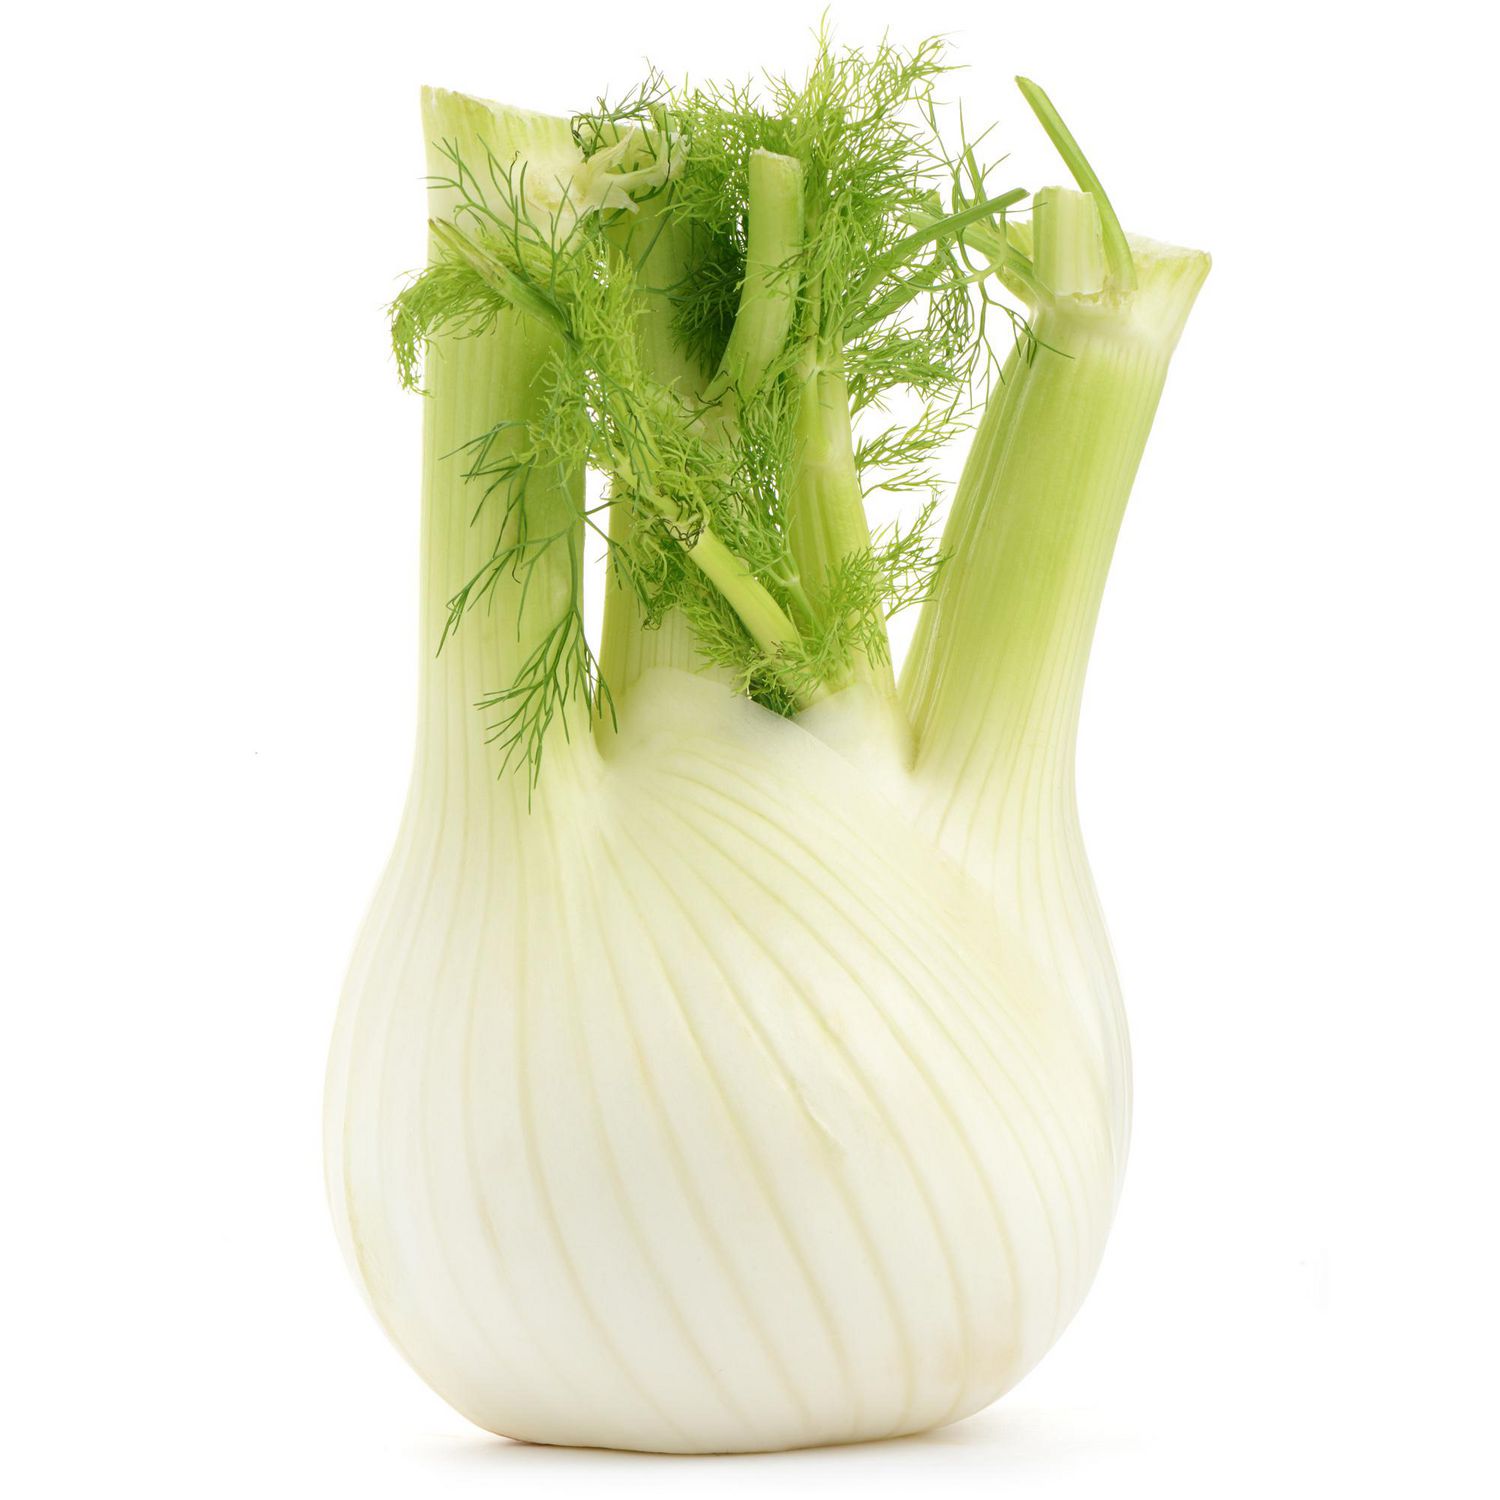 Fennel is crunchy and slightly sweet, adding a refreshing contribution to t...